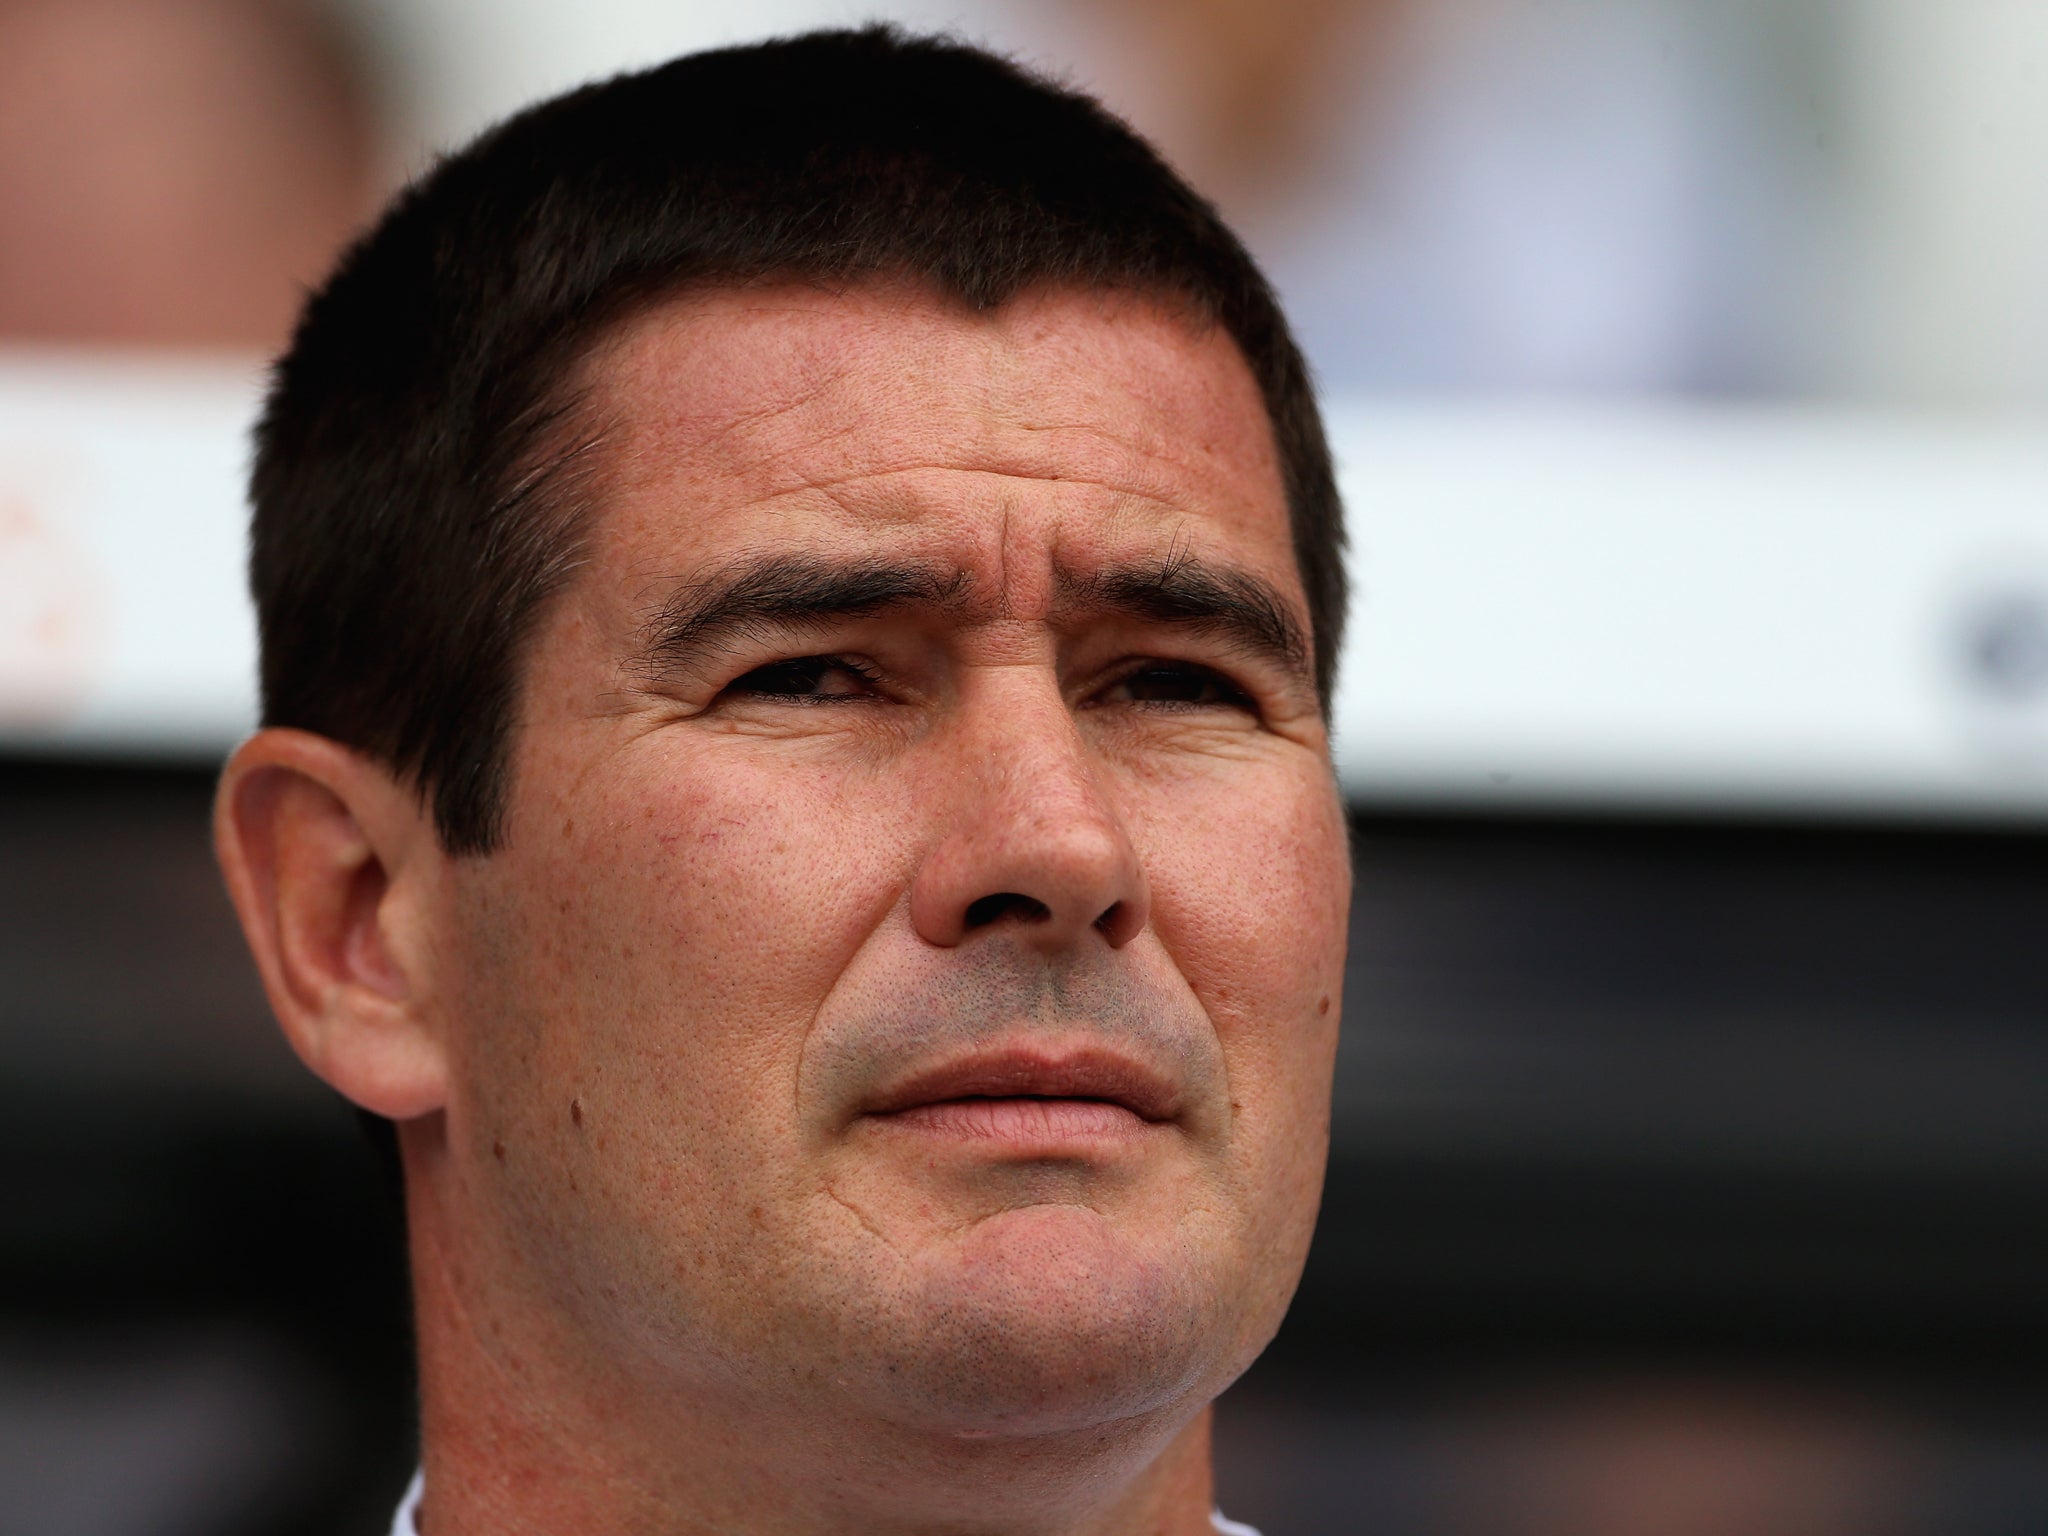 Nigel Clough has been announced as the new manager of Sheffield United